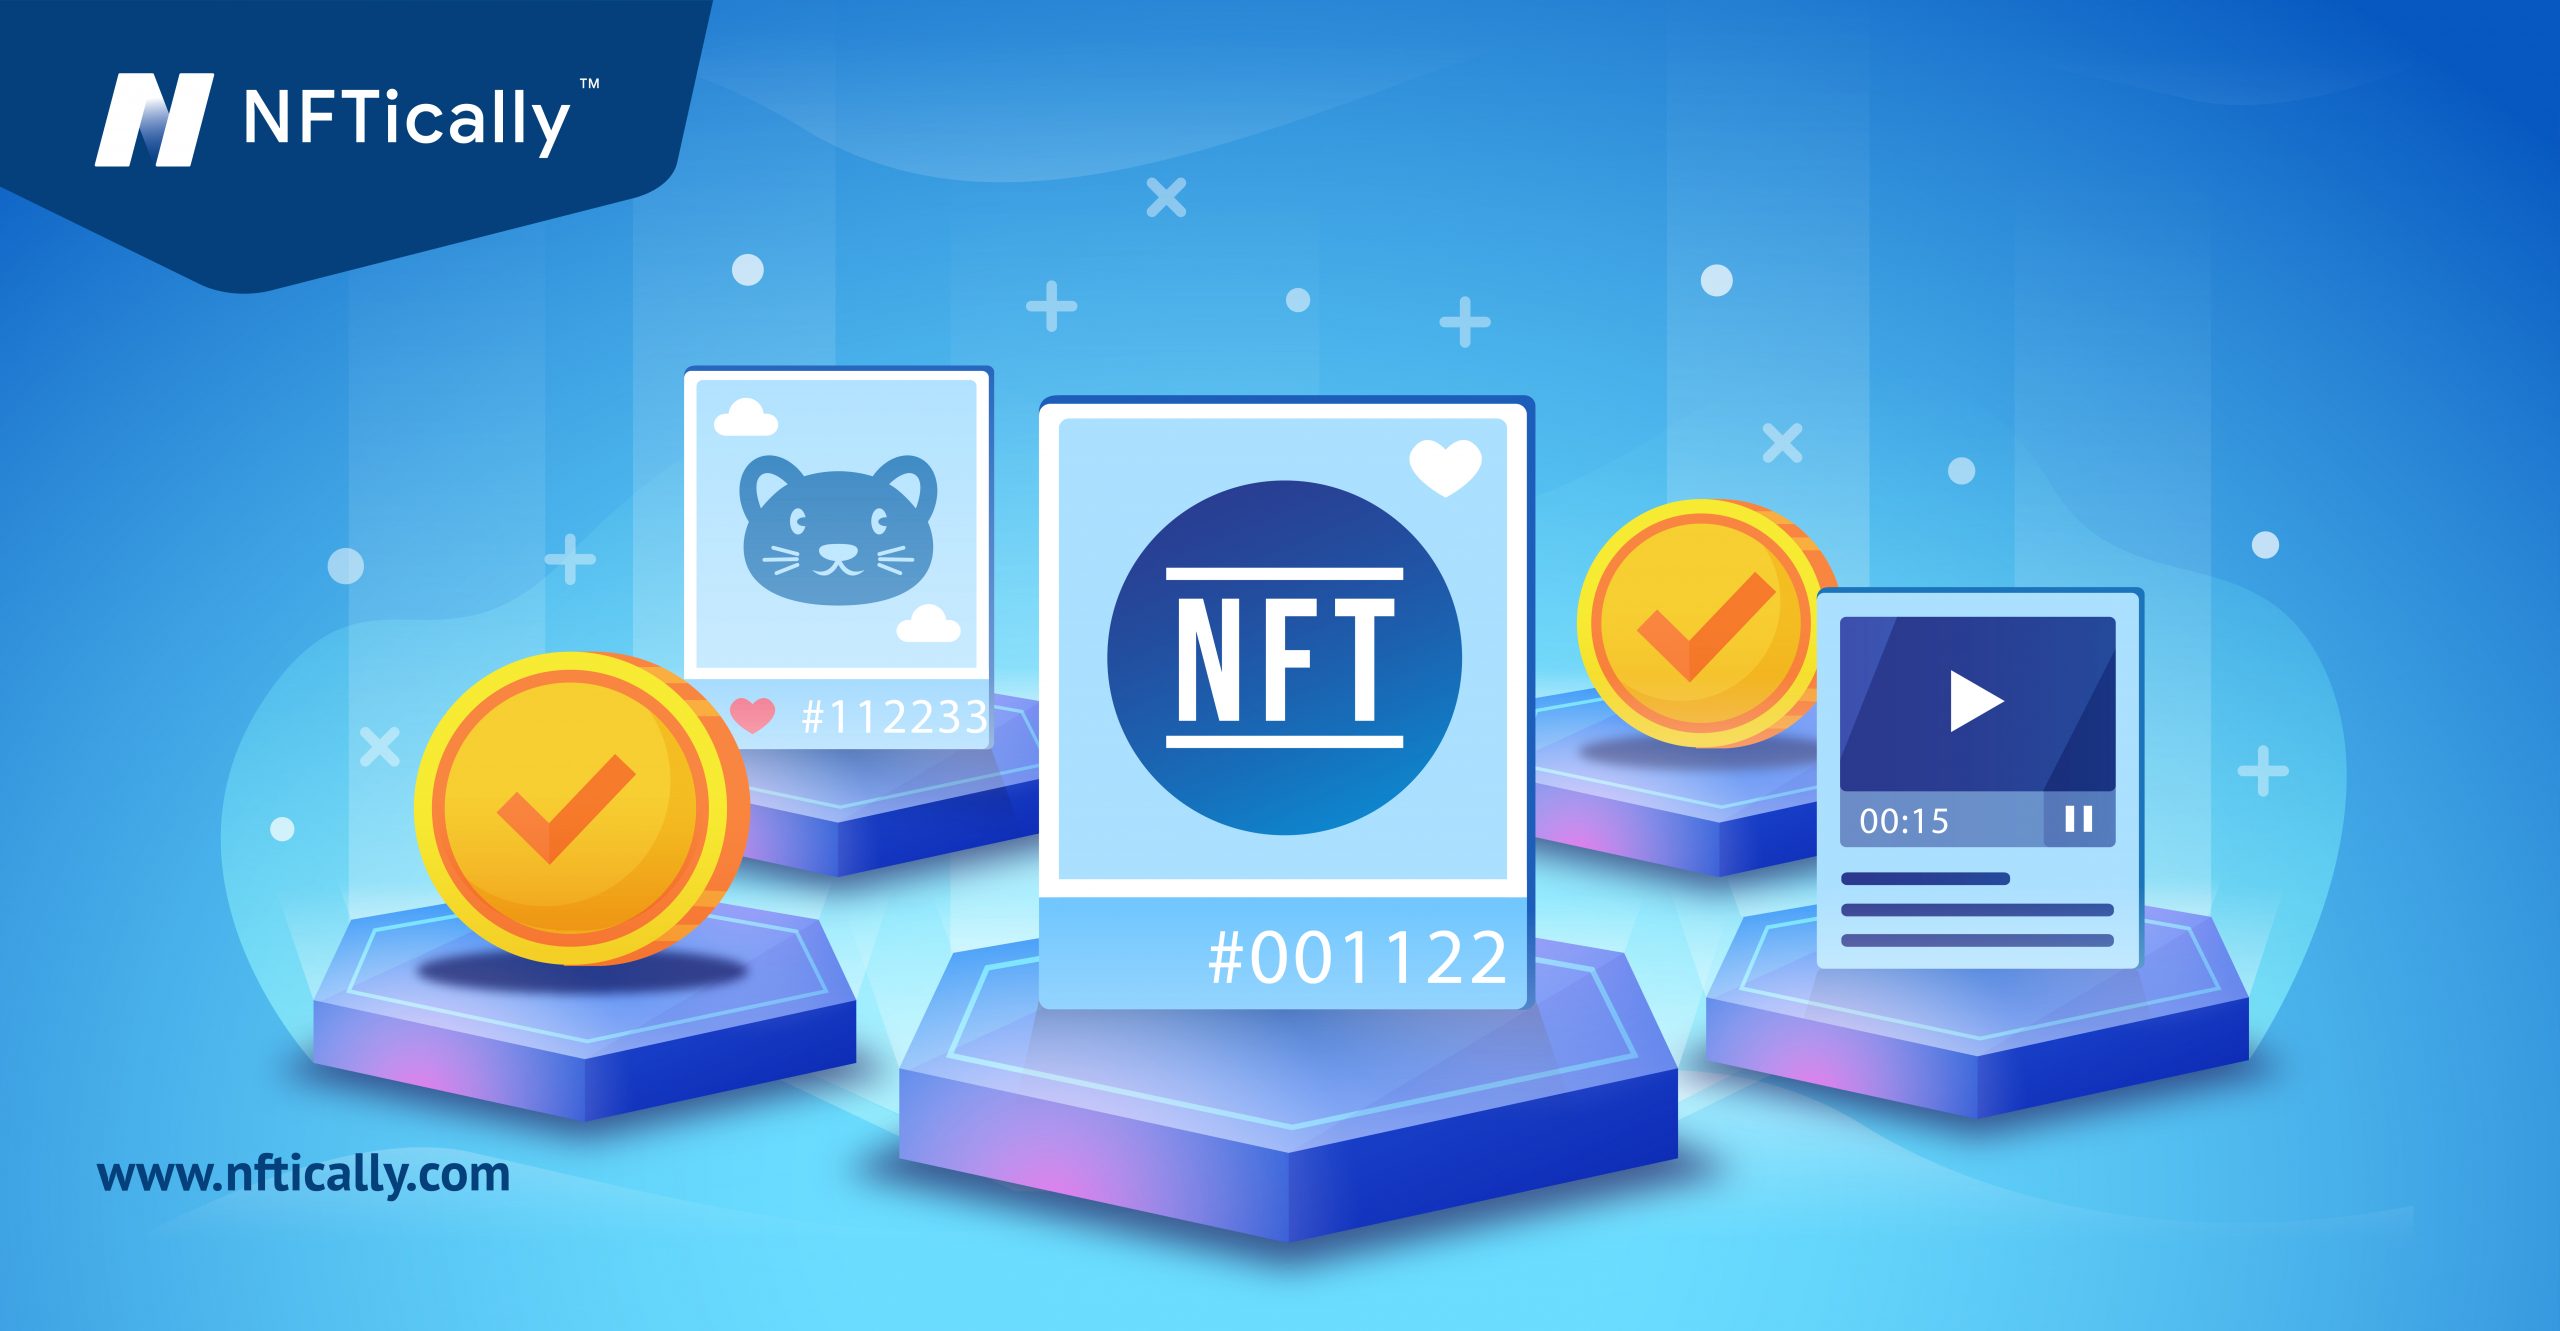 how to sell nft crypto